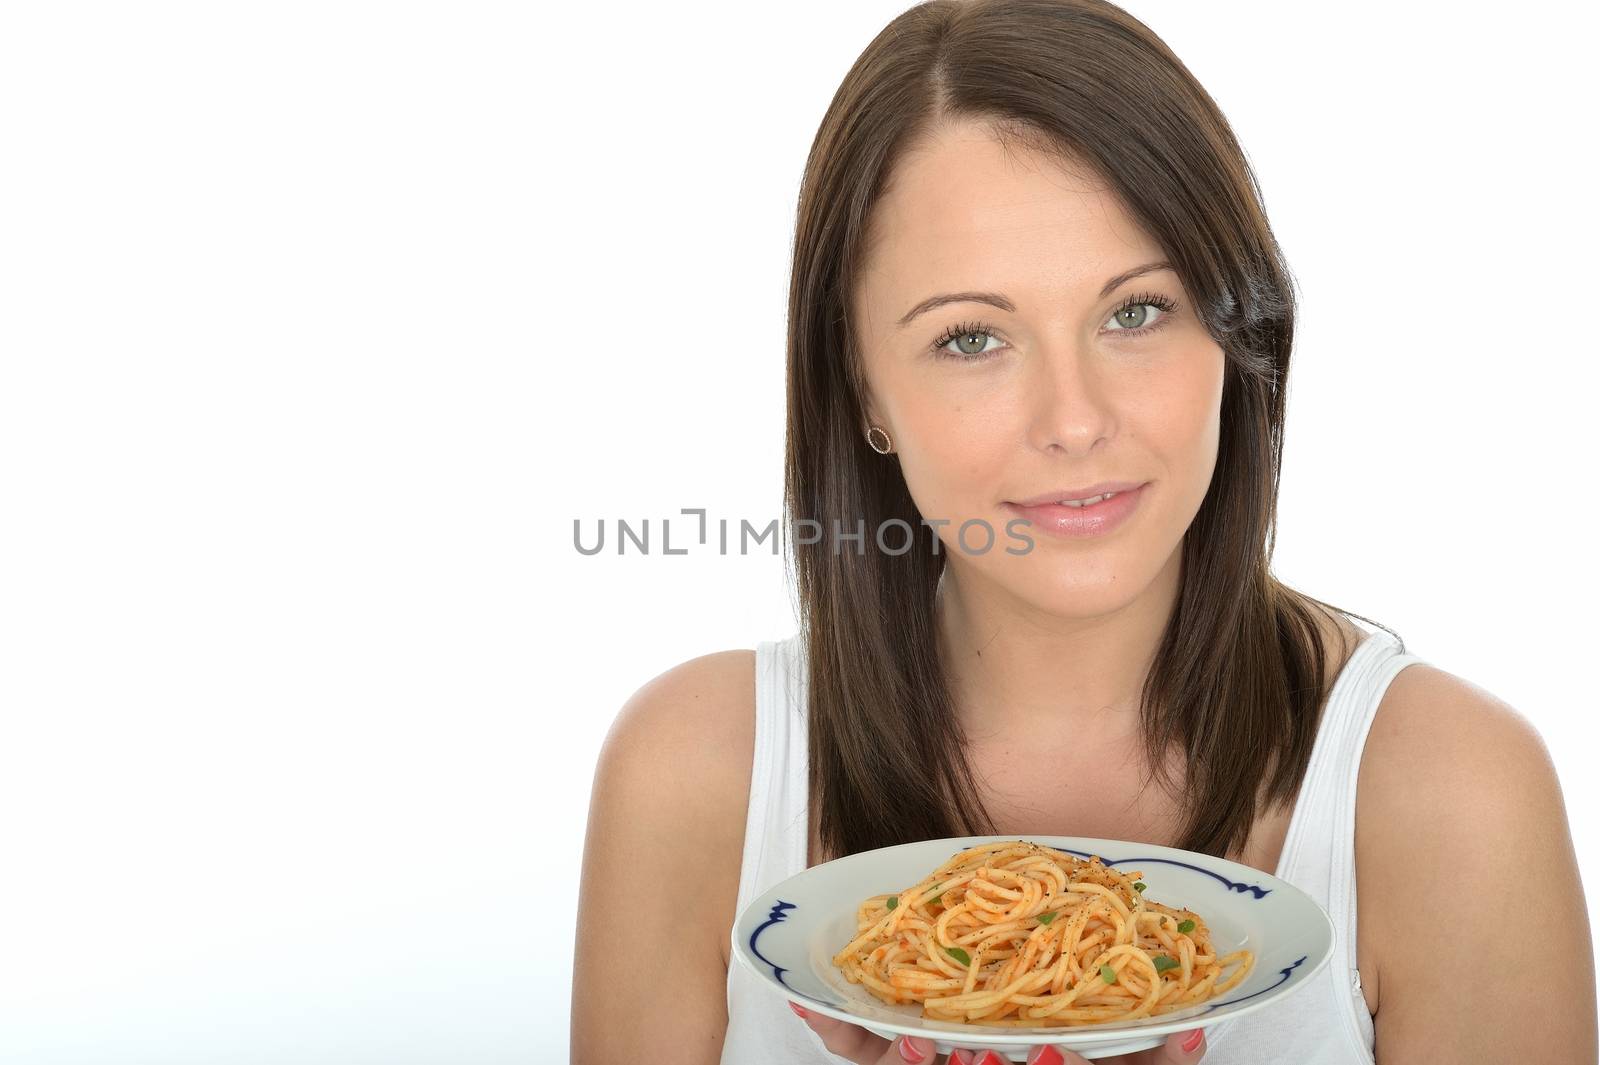 Attracrtive Young Woman Holding a Plate of Italian Style Spaghetti Pasta Food